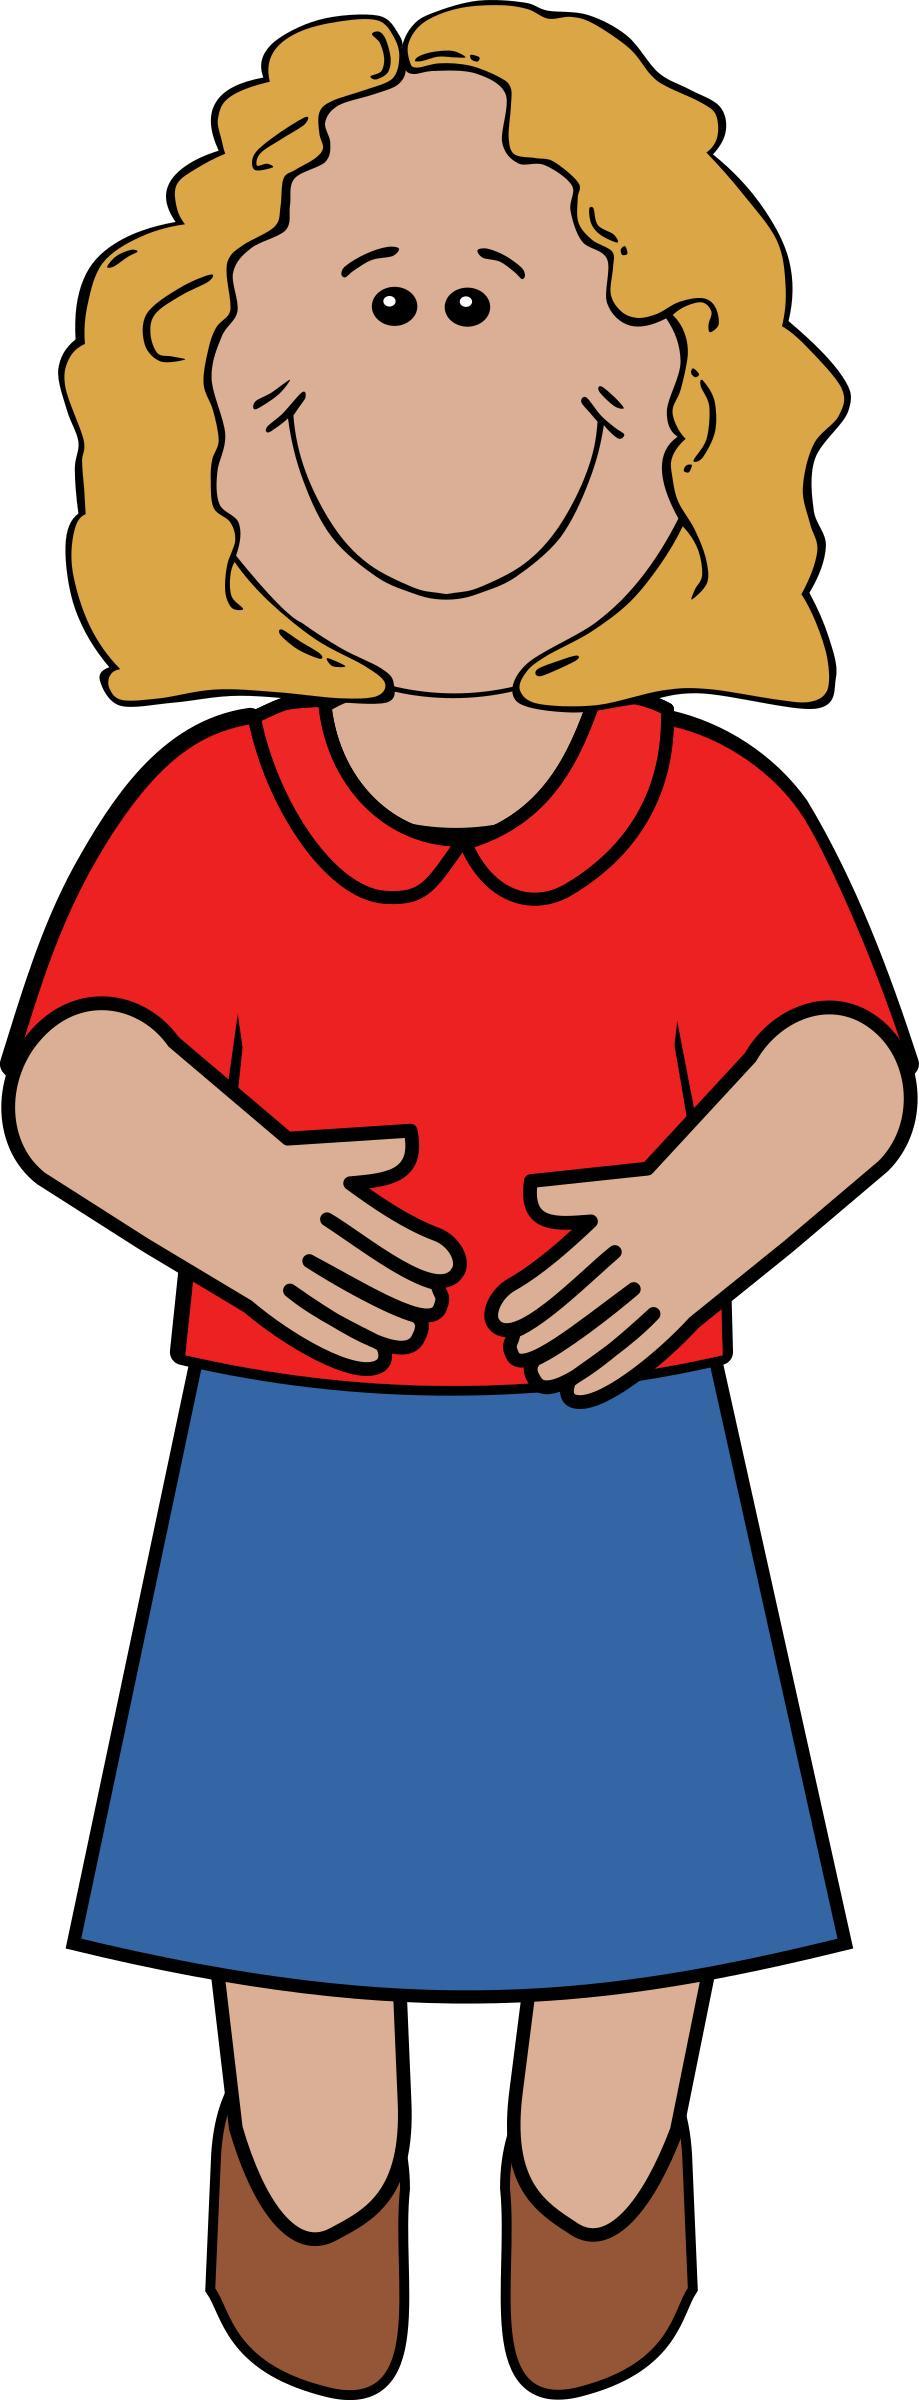 mommy 2 png transparent